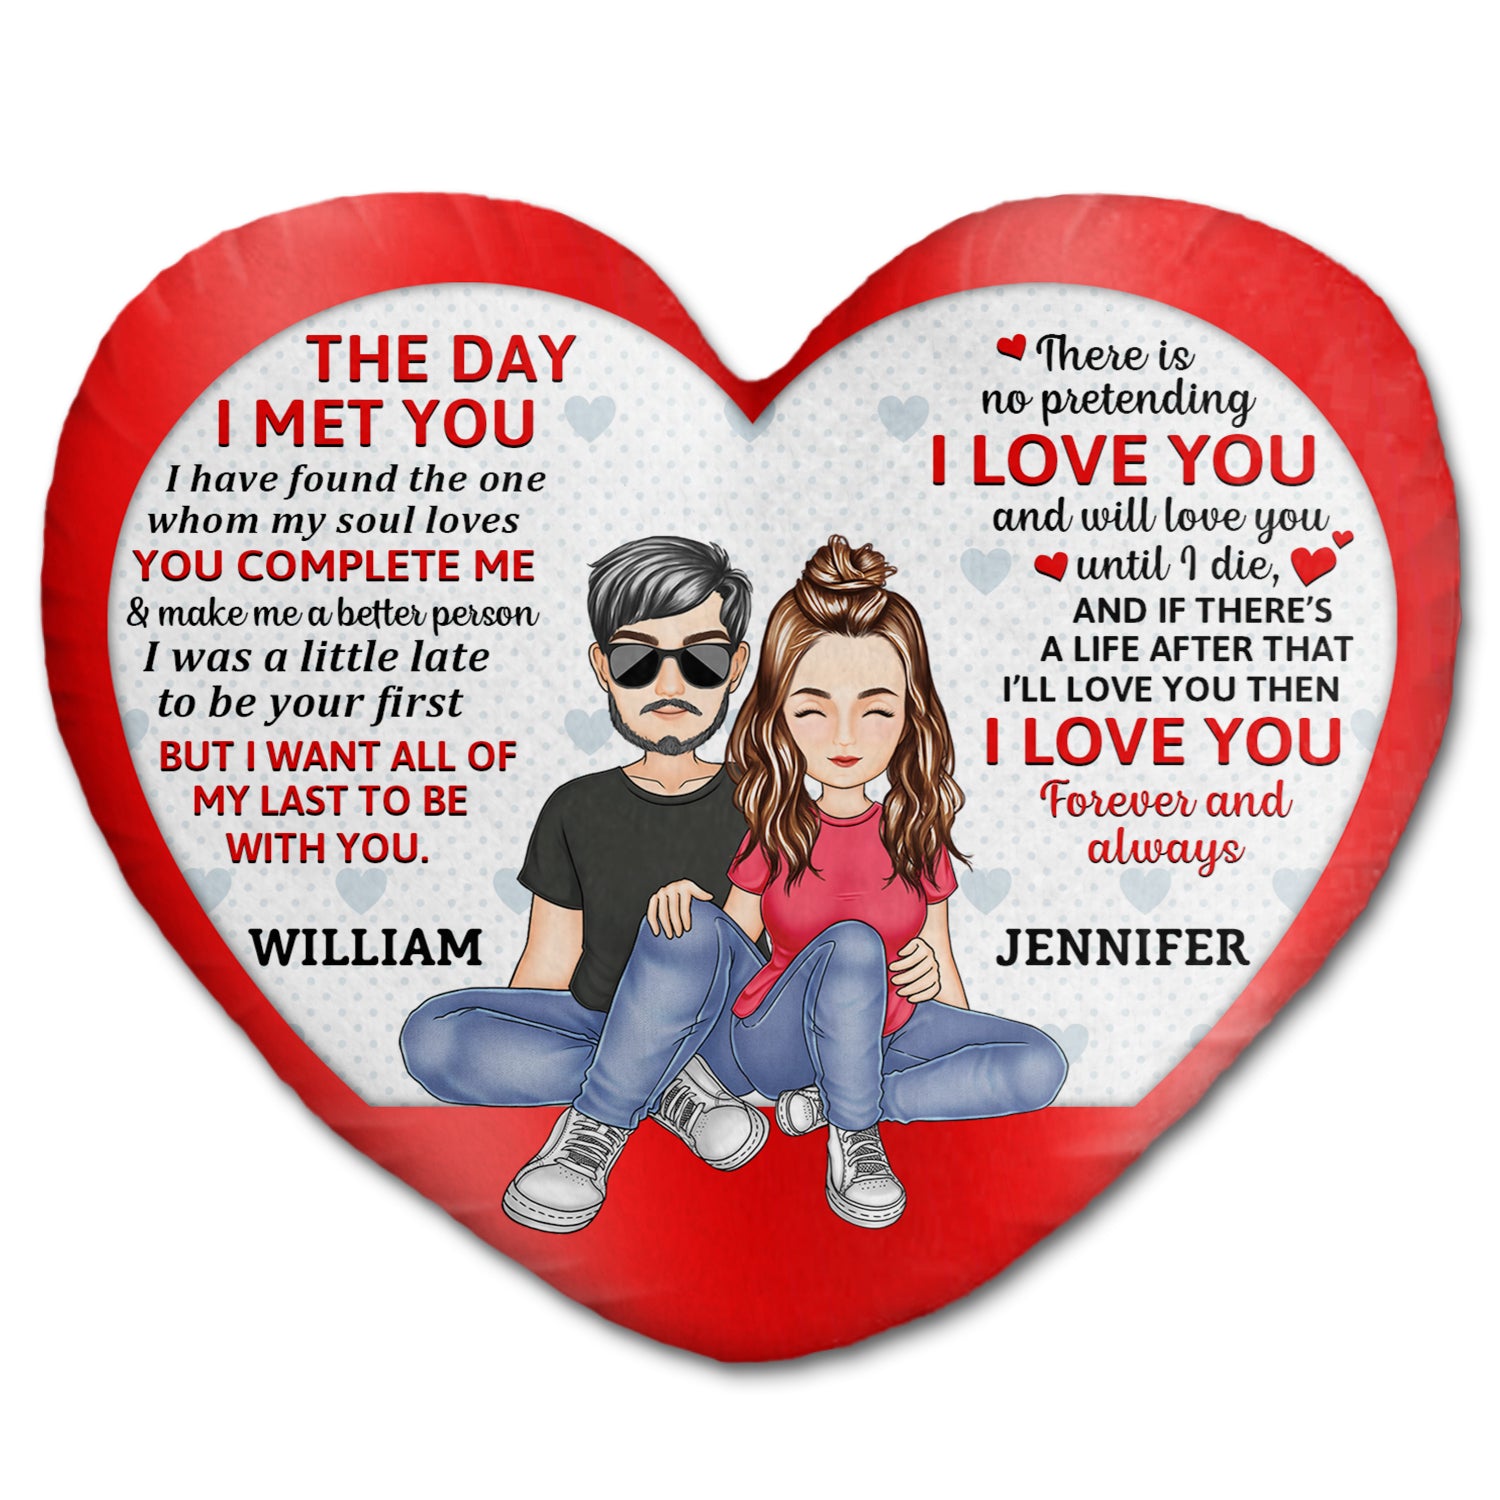 The Day I Met You - Gift For Couples, Husband And Wife - Personalized Heart Shaped Pillow